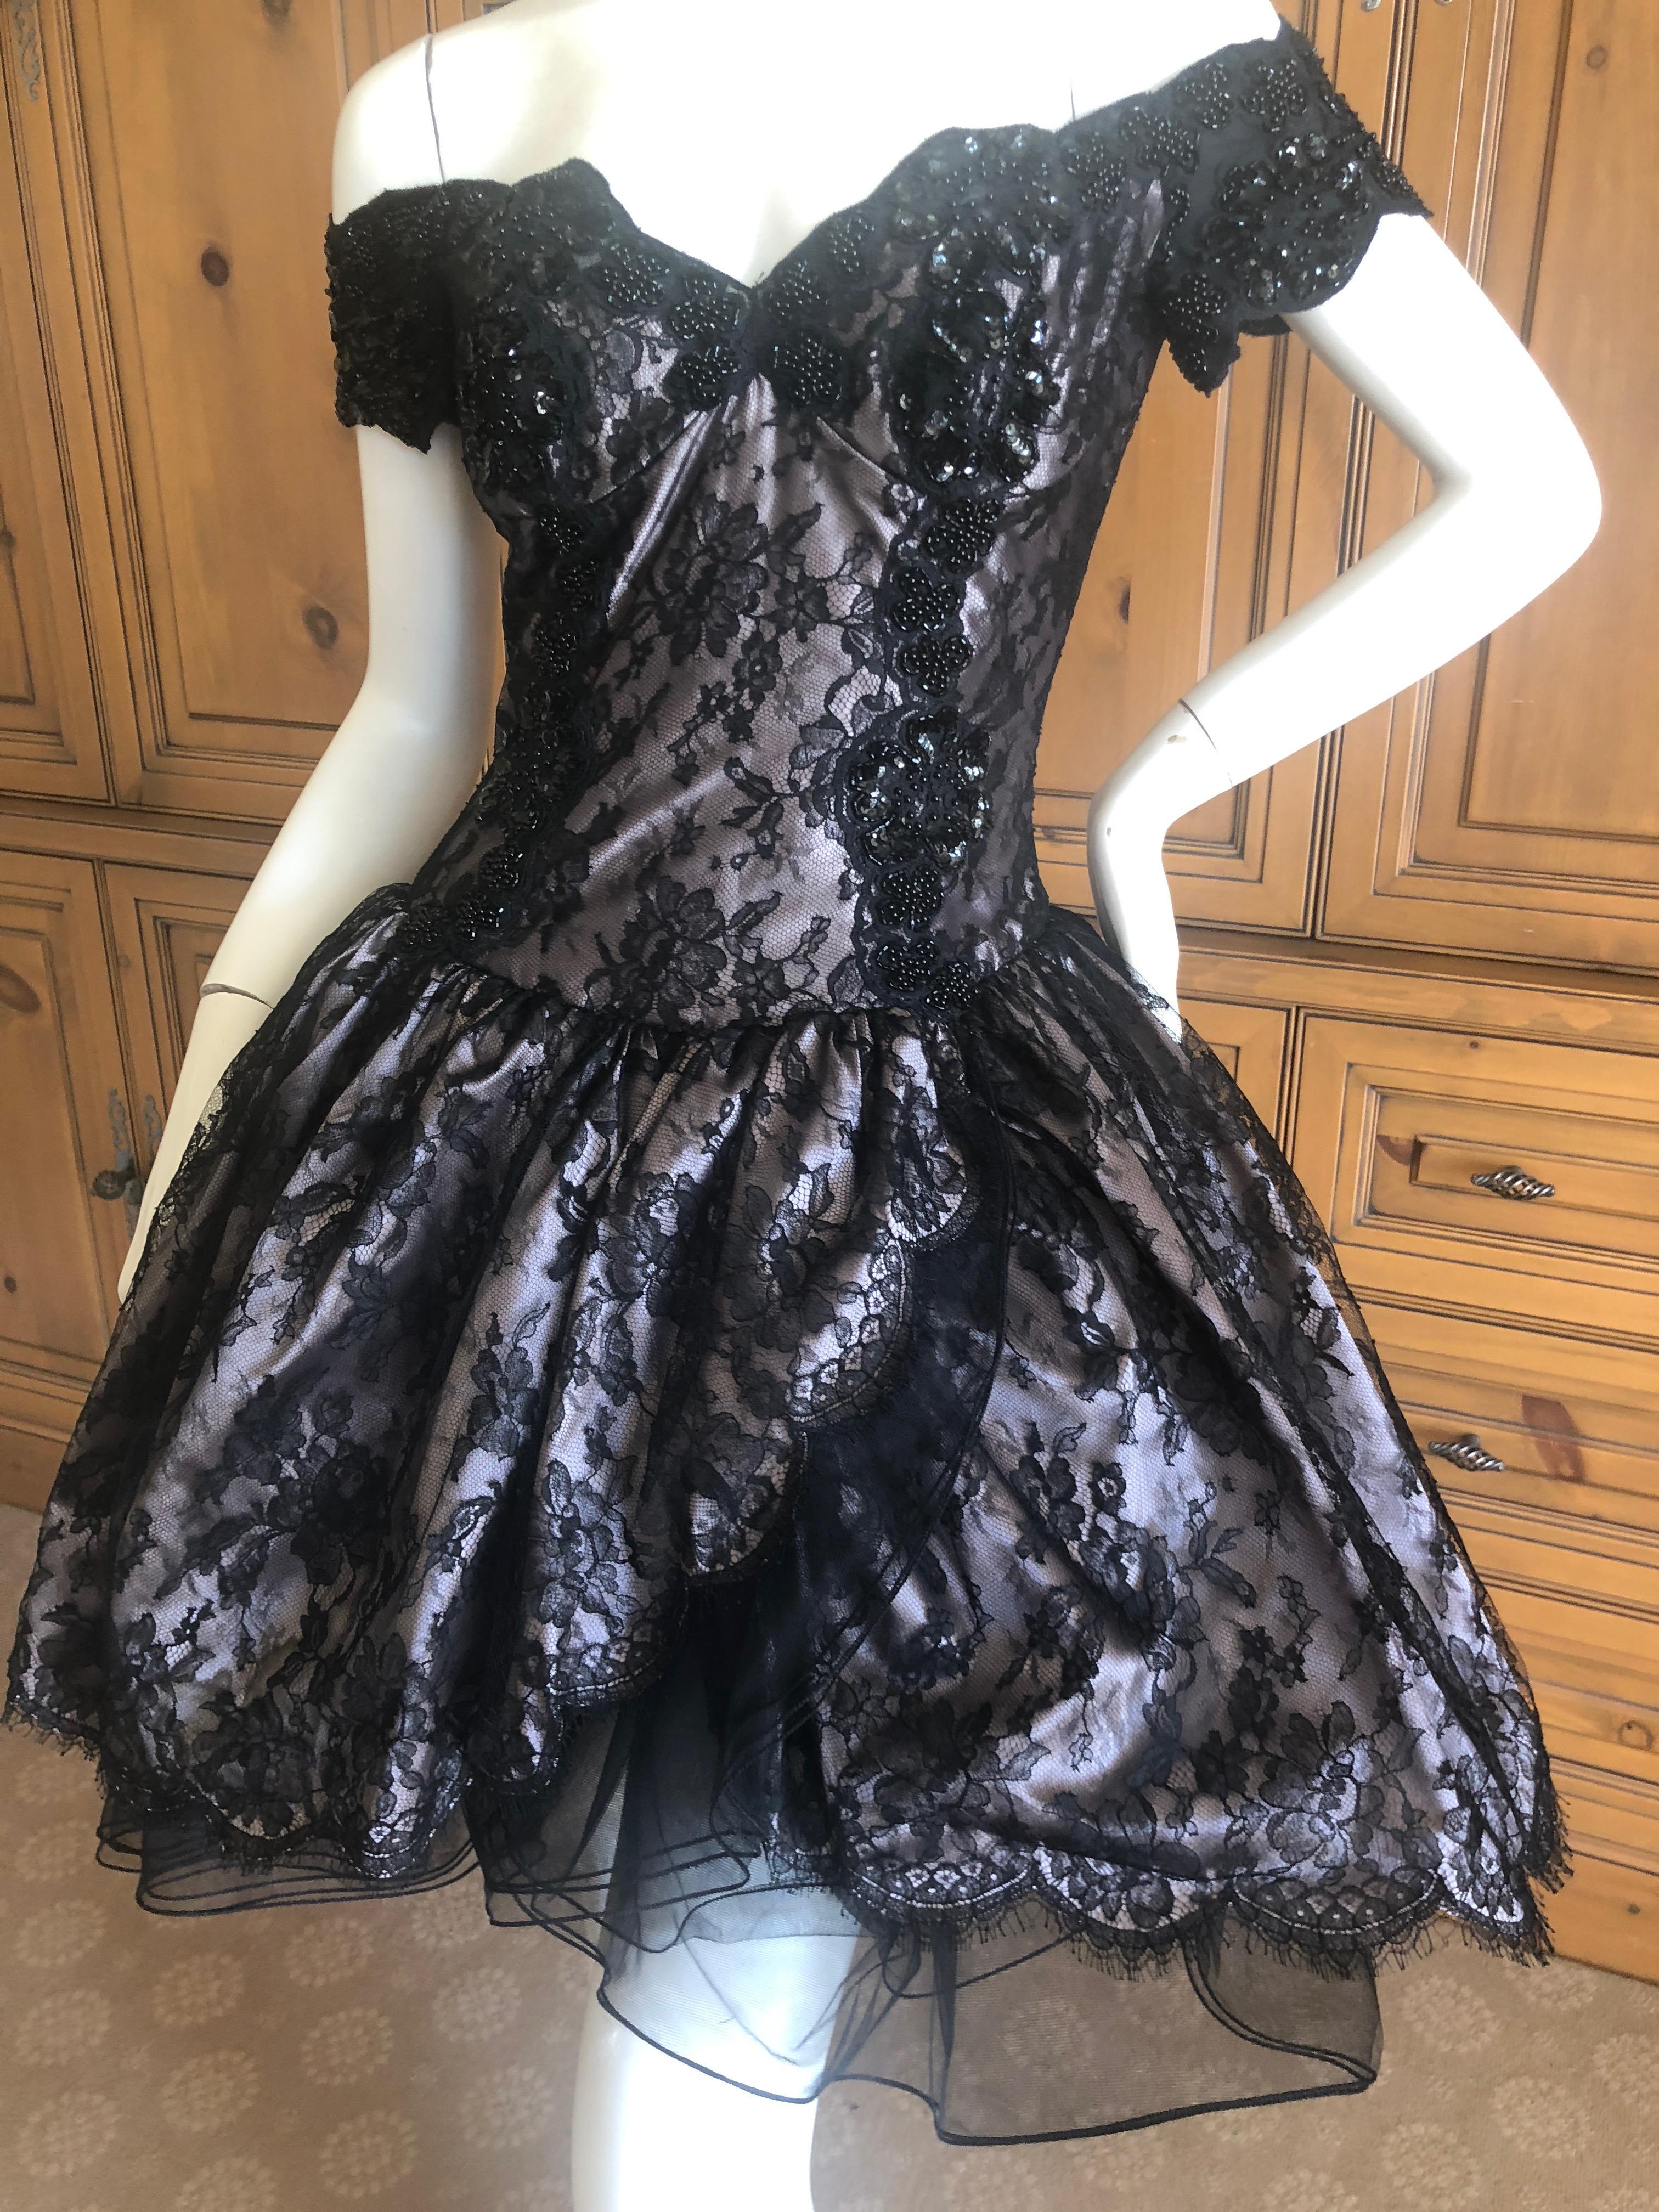 Vicky Teil Couture Paris Bergdorf Goodman 1982 Beaded Black Mini Pouf Ball Dress.
This has a built in inner corset  and zips up the back.
Please use the zoom feature to see the details.
Size 38
Bust 36